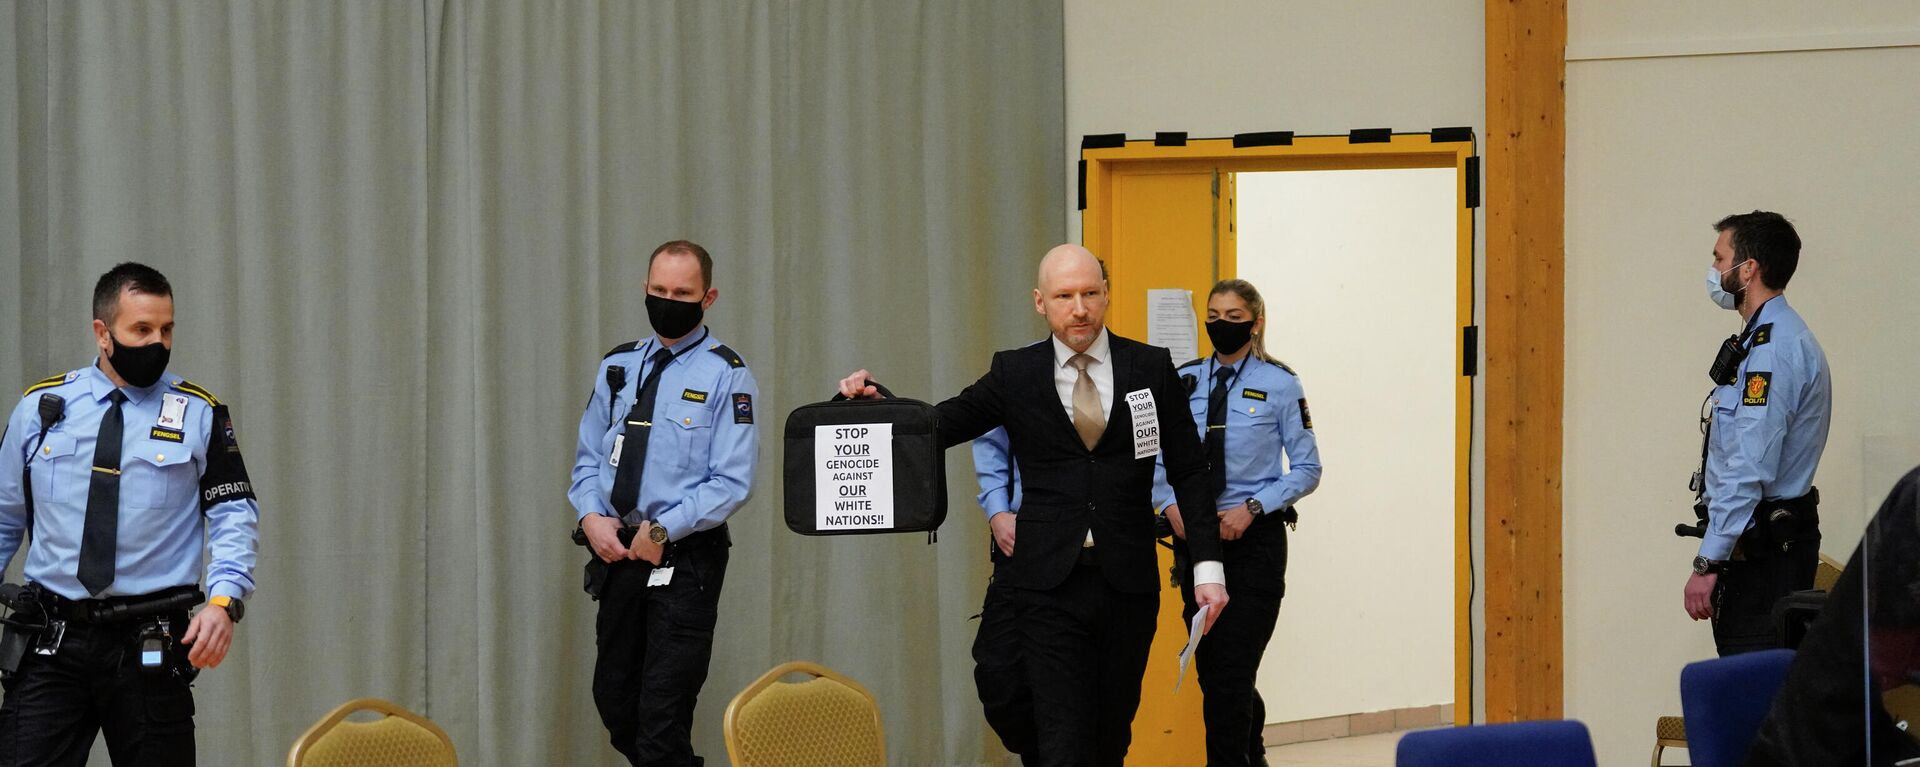 Anders Behring Breivik (C) arrives on the first day of the trial where he is requesting release on parole, on January 18, 2022 at a makeshift courtroom in Skien prison, Norway. - Sputnik International, 1920, 21.01.2022